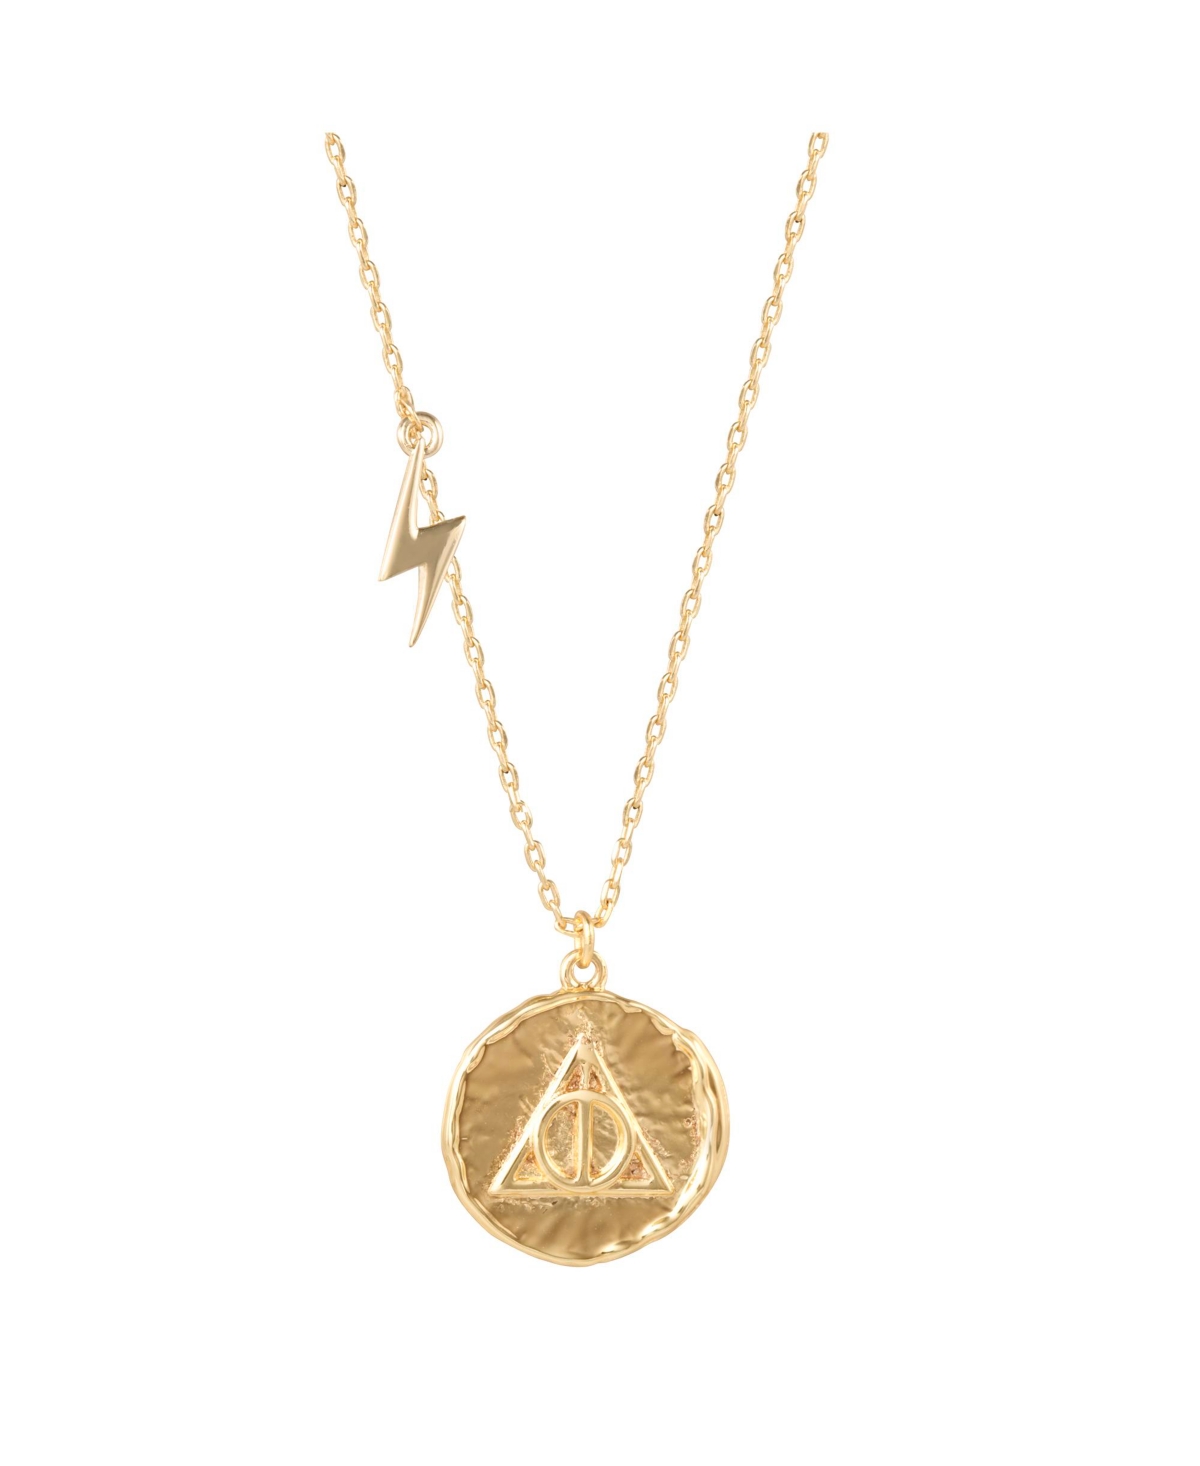 Wizarding World Deathly Hallows Gold Plated Potter Medallion Pendant, 16 + 2" - Gold tone